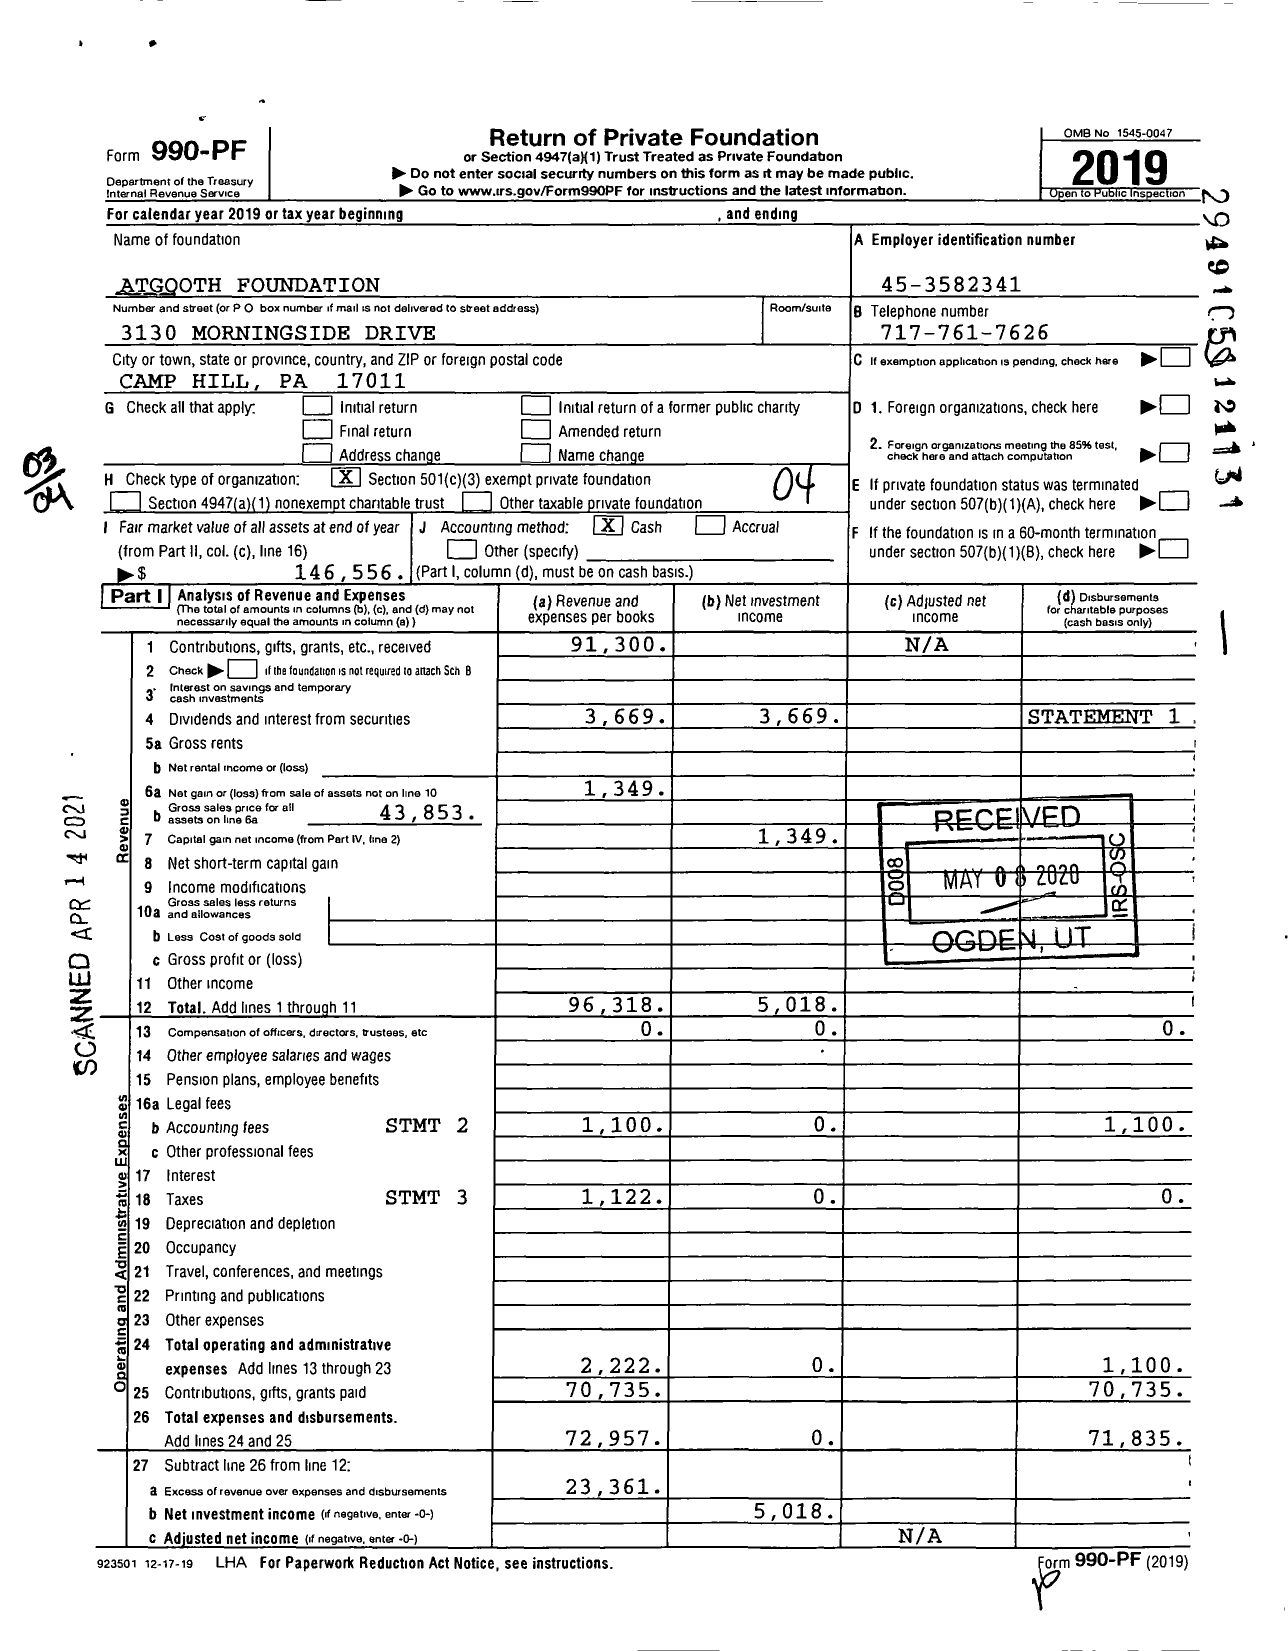 Image of first page of 2019 Form 990PF for Atgooth Foundation 600001010